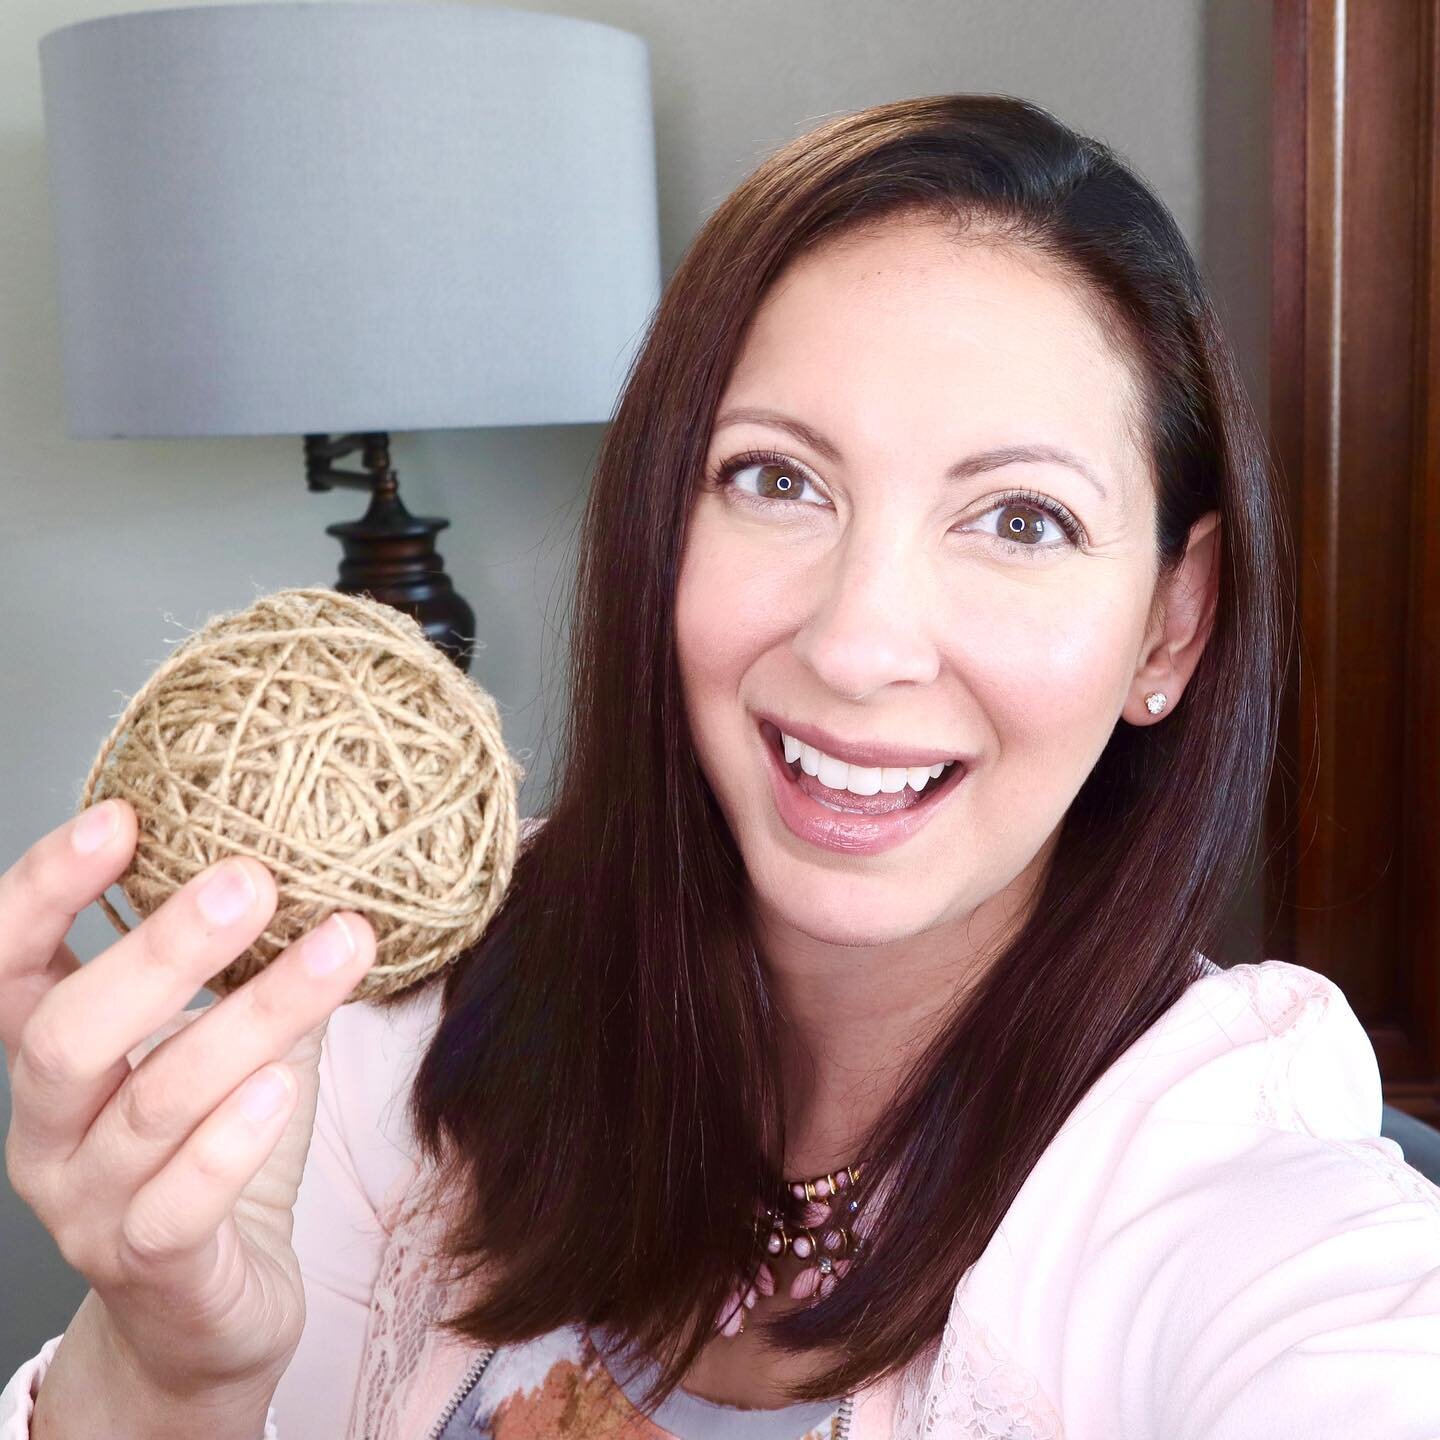 👉🏼 Swipe to see all 6 ways I made these twine balls. They look so nice in a bowl together or as filler for those empty spots on your bookshelves. The link to the tutorial is in my bio!⁣
⁣⁣⁣⁣⁣⁣⁣⁣⁣⁣⁣⁣⁣⁣
⤴️ 𝐈 𝐝𝐨 𝐜𝐫𝐚𝐟𝐭𝐬 𝐚𝐧𝐝 𝐡𝐨𝐦𝐞 𝐝𝐞𝐜?